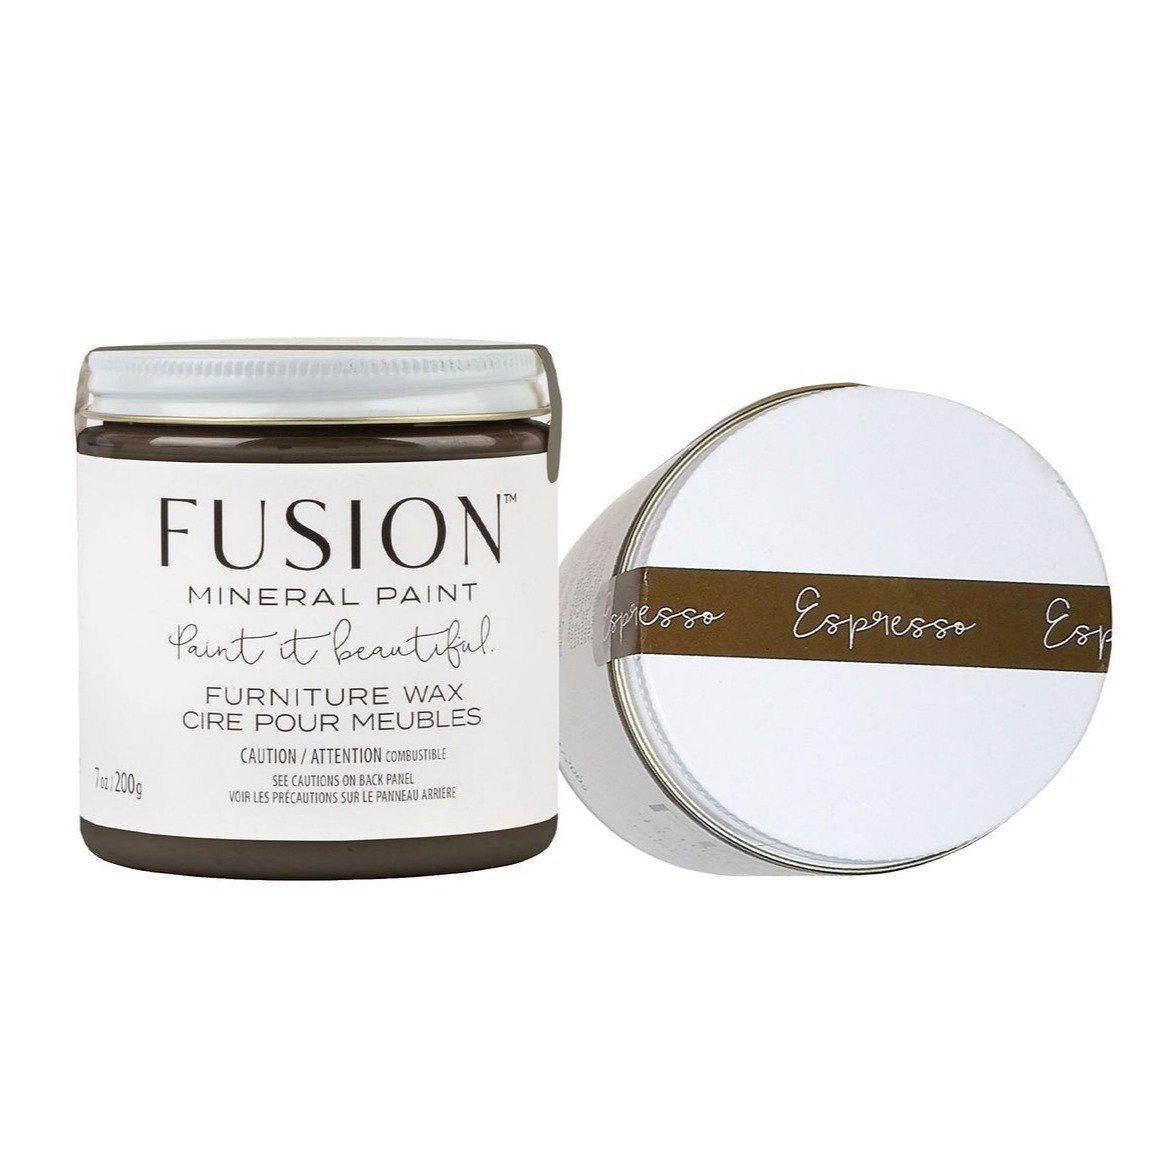 EXPRESSO FURNITURE WAX 50g - Fusion Mineral Paint